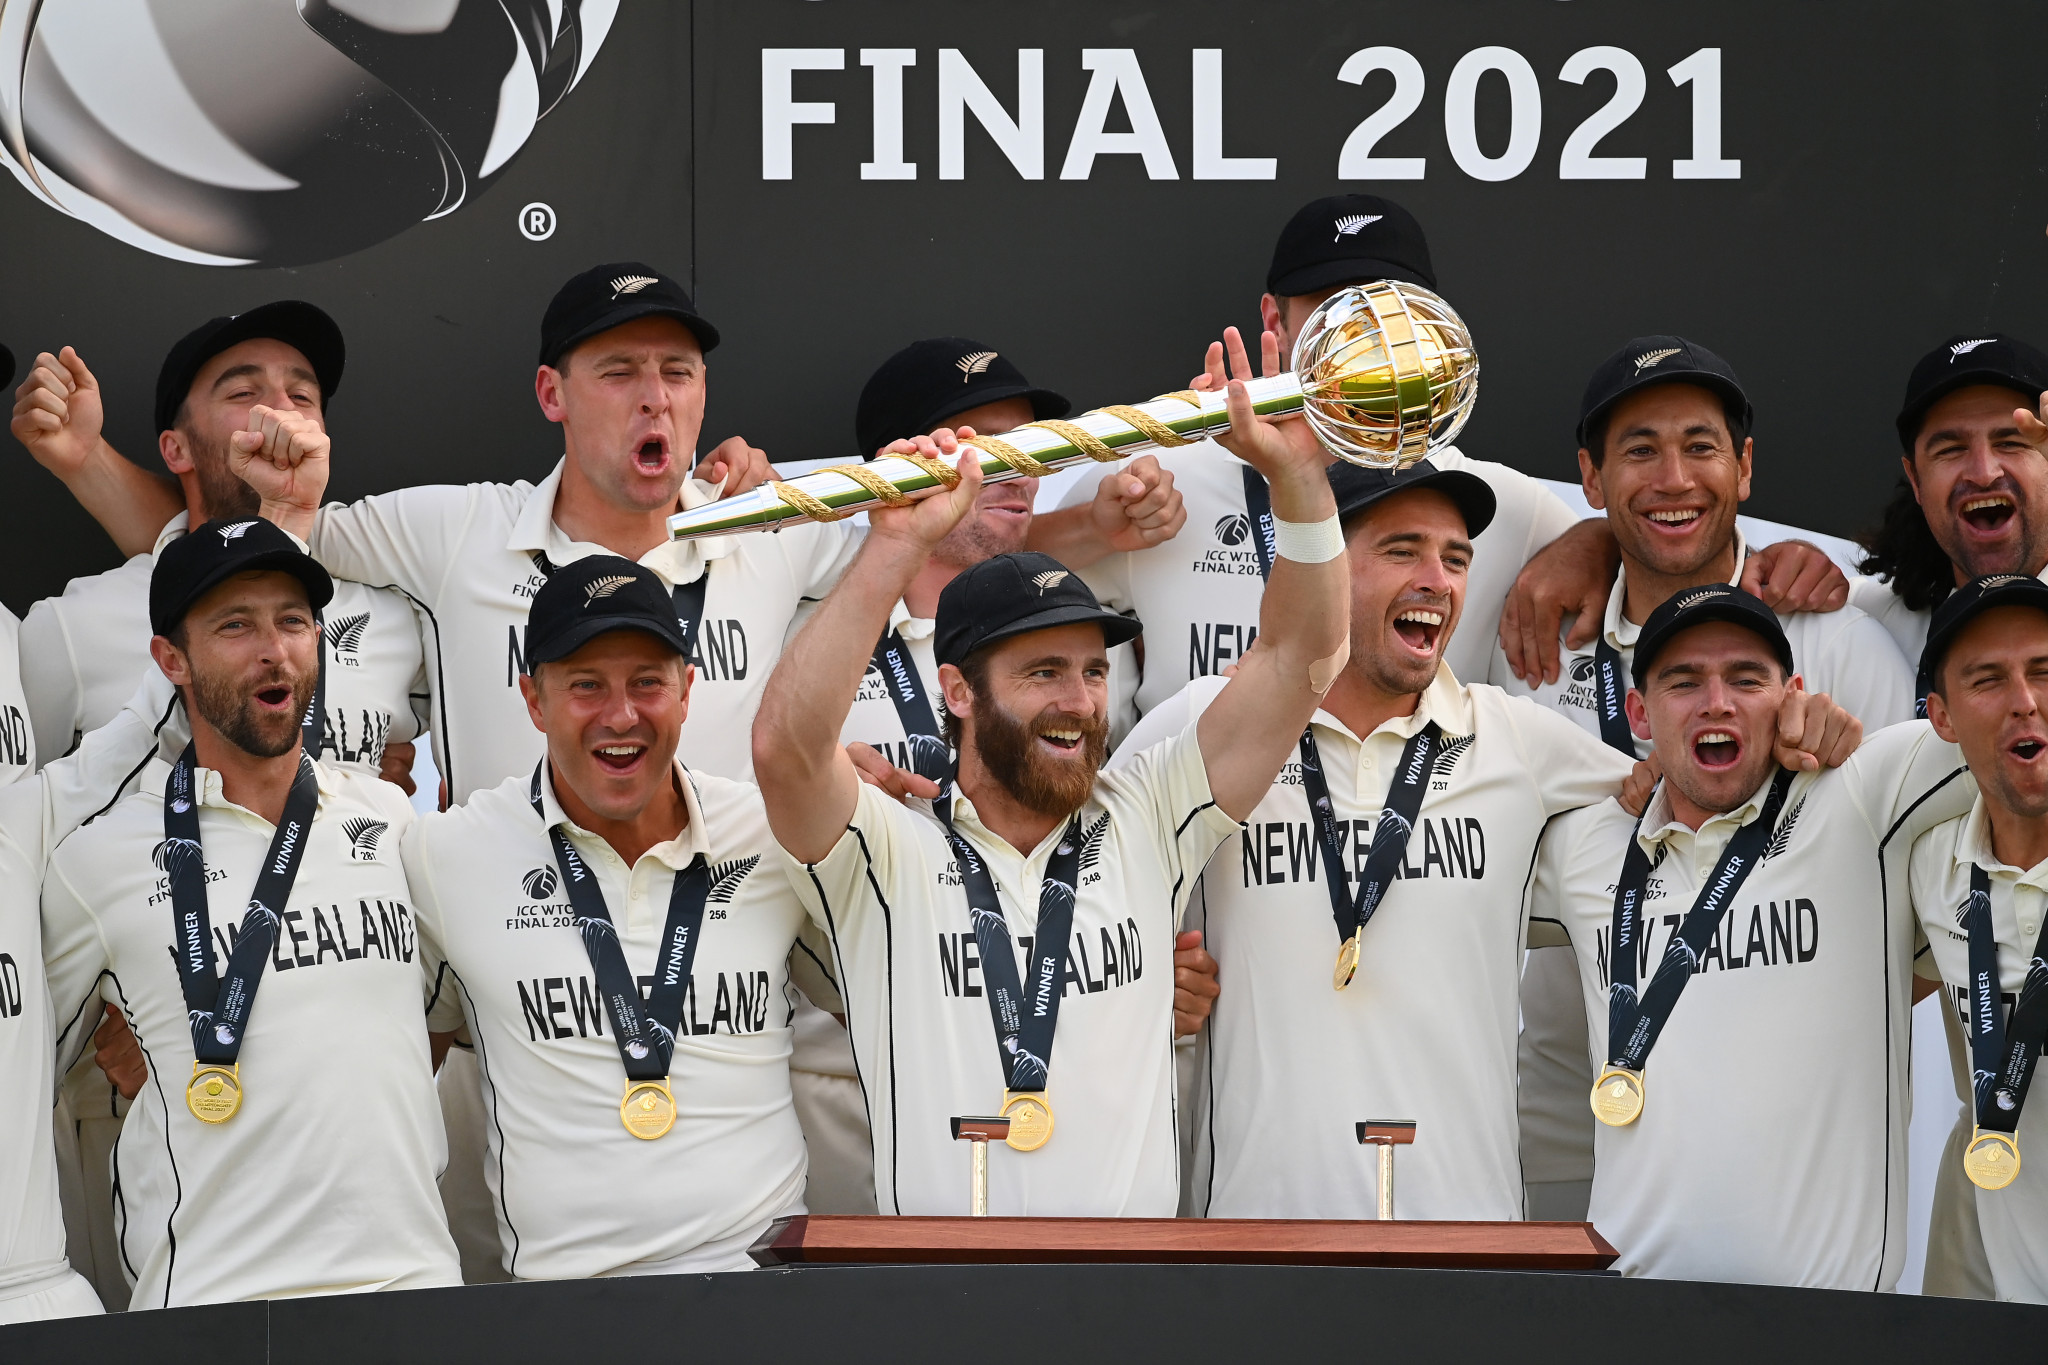 New Zealand celebrate after winning the first World Test Championship Final in 2021 ©Getty Images